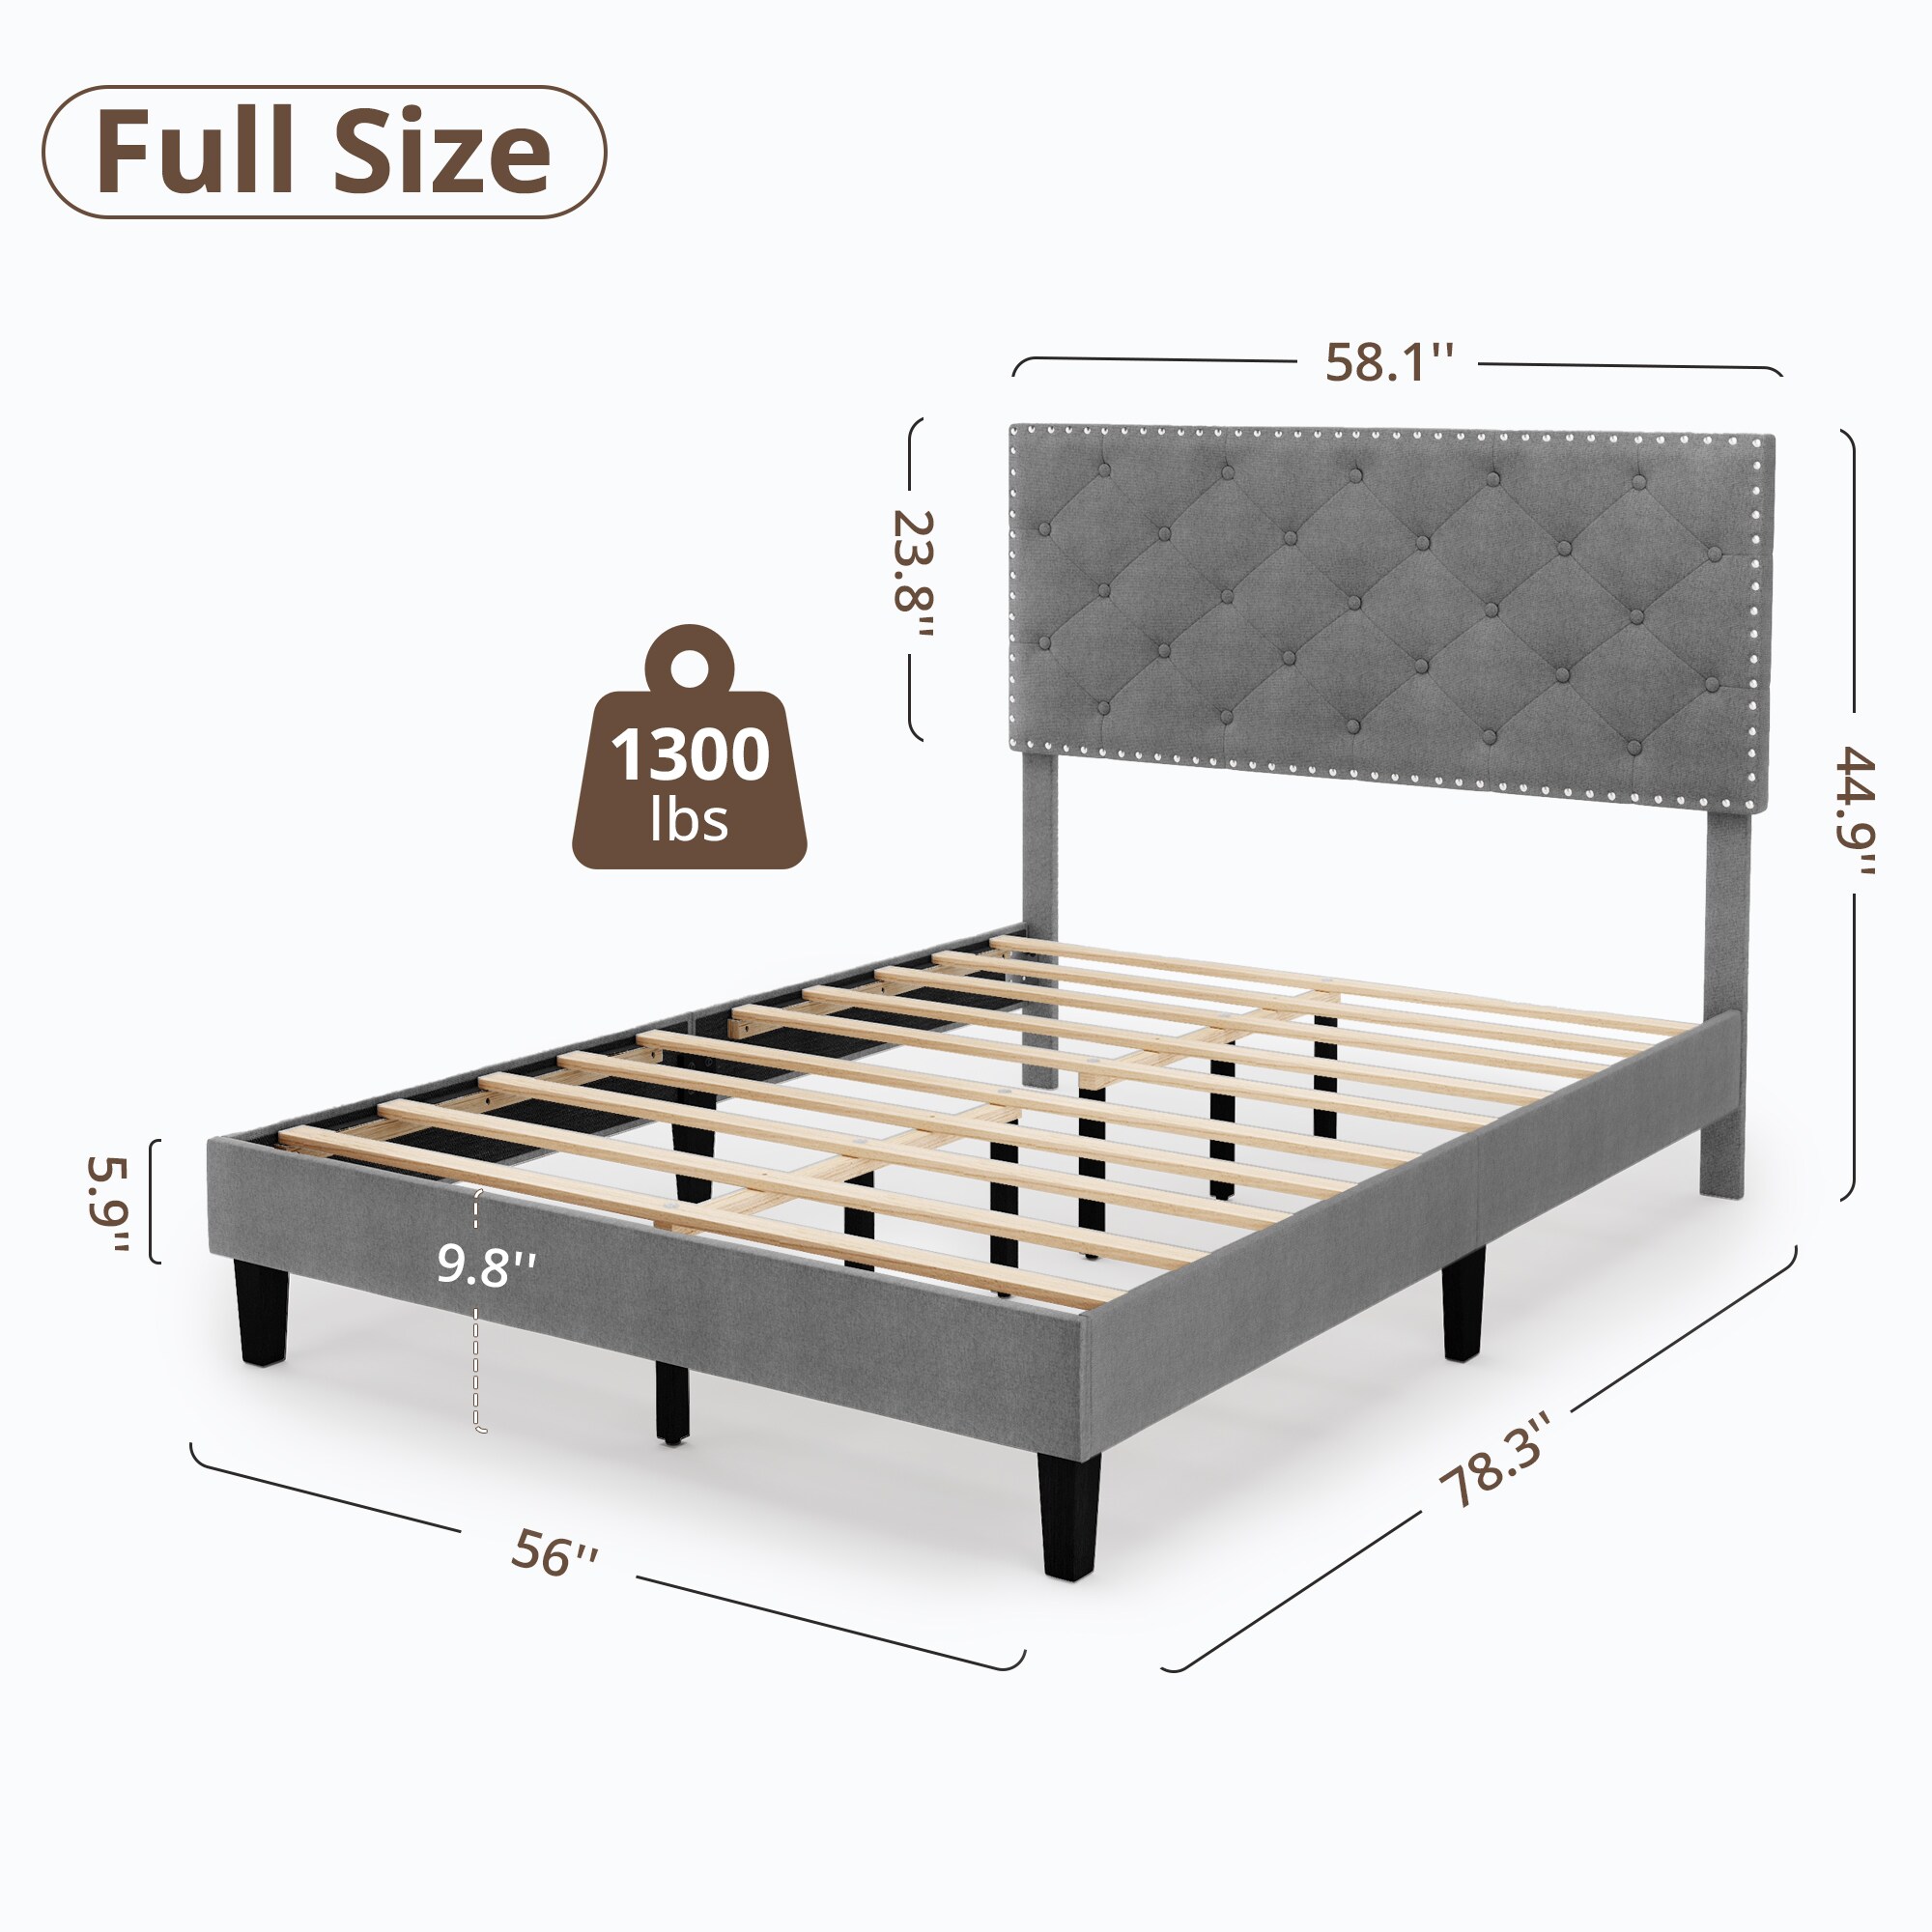 LUE BONA Gray Full Wood Bed Frame in the Beds department at Lowes.com